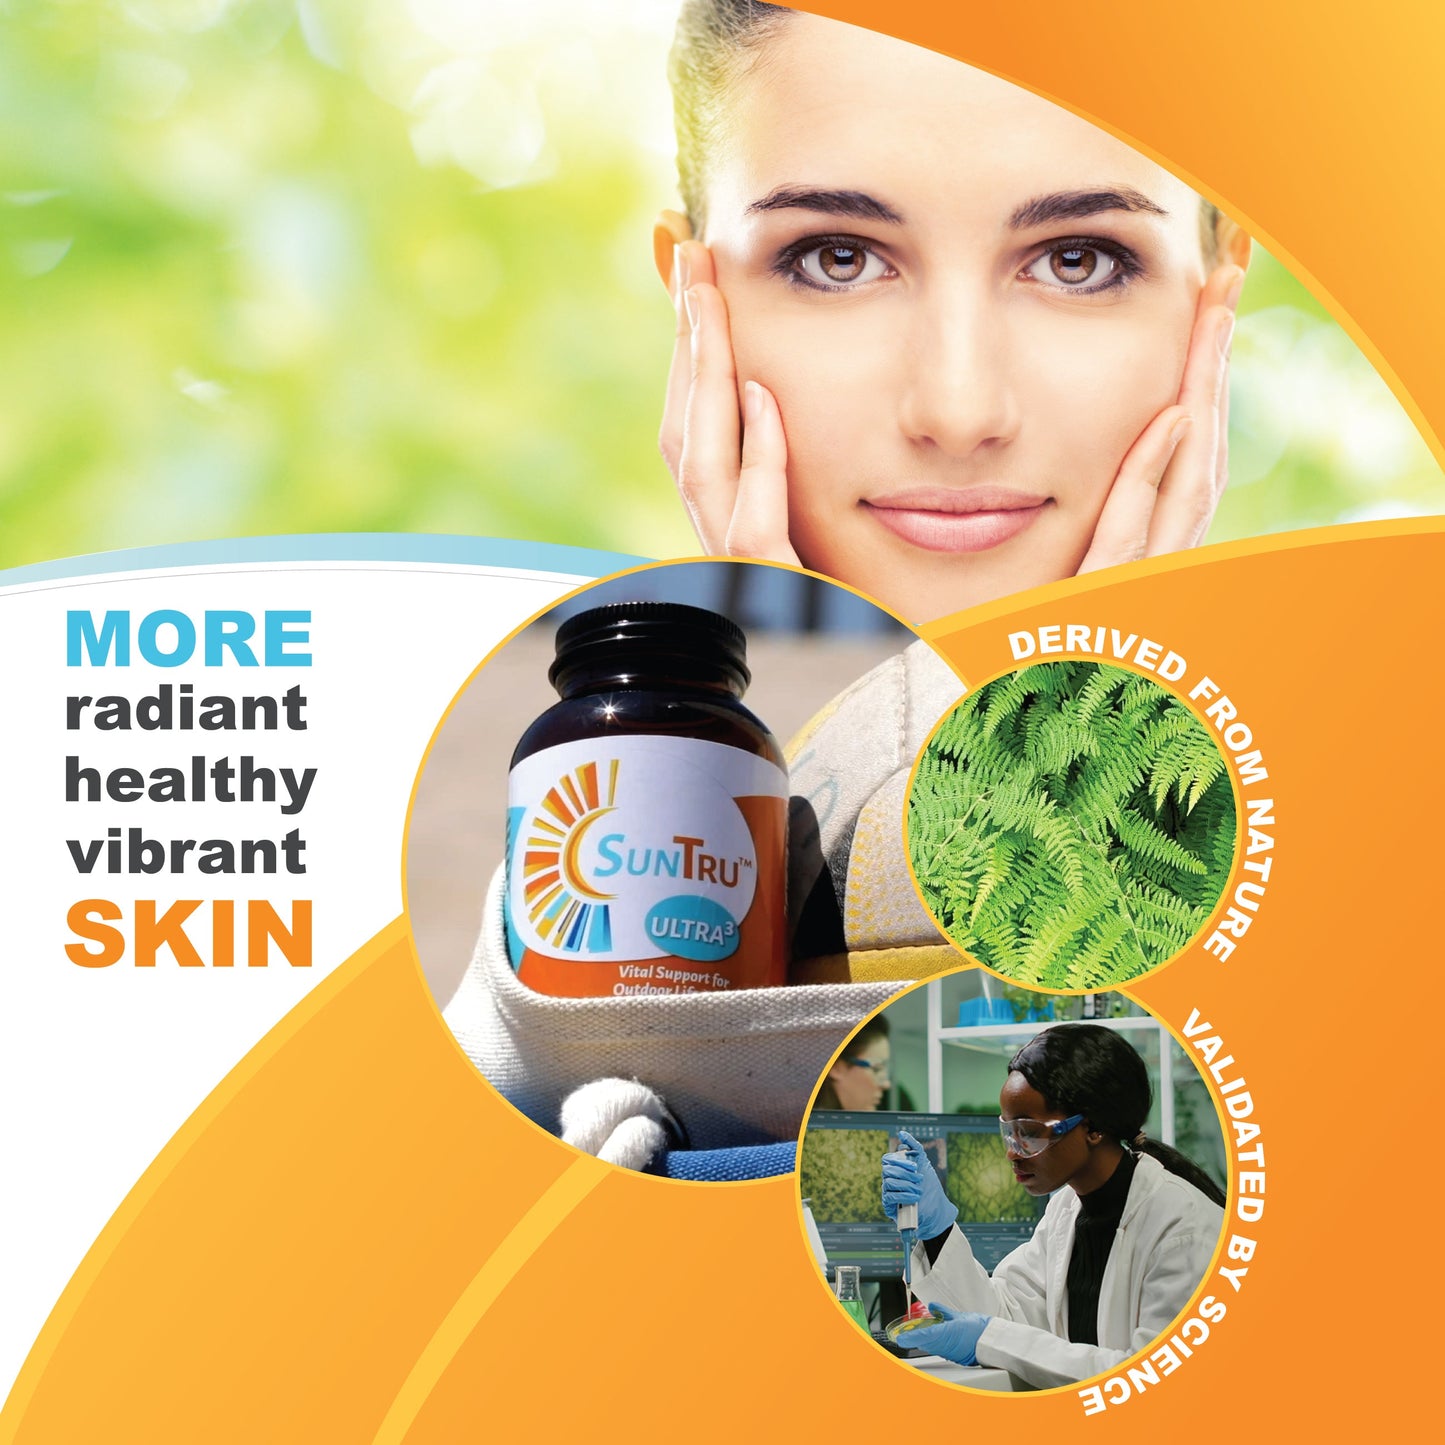 A beautiful woman is holding her face. A bottle of SunTru Ultra 3 is in a beach bag with a volleyball. A black woman scientist is in a lab testing with a microscope. Text - Derived from nature. Validated by science. MORE radiant, healthy, vibrant SKIN